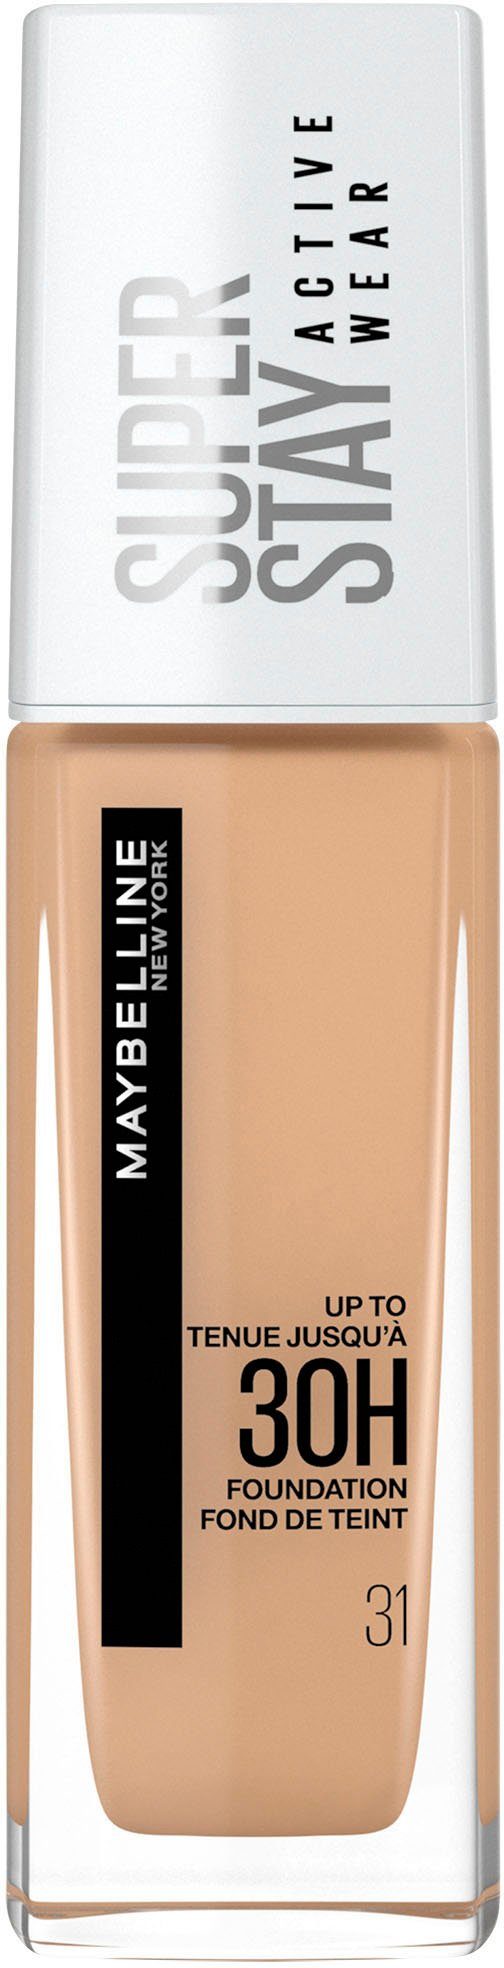 MAYBELLINE NEW YORK Foundation Super Nude 31 Active Warm Stay Wear